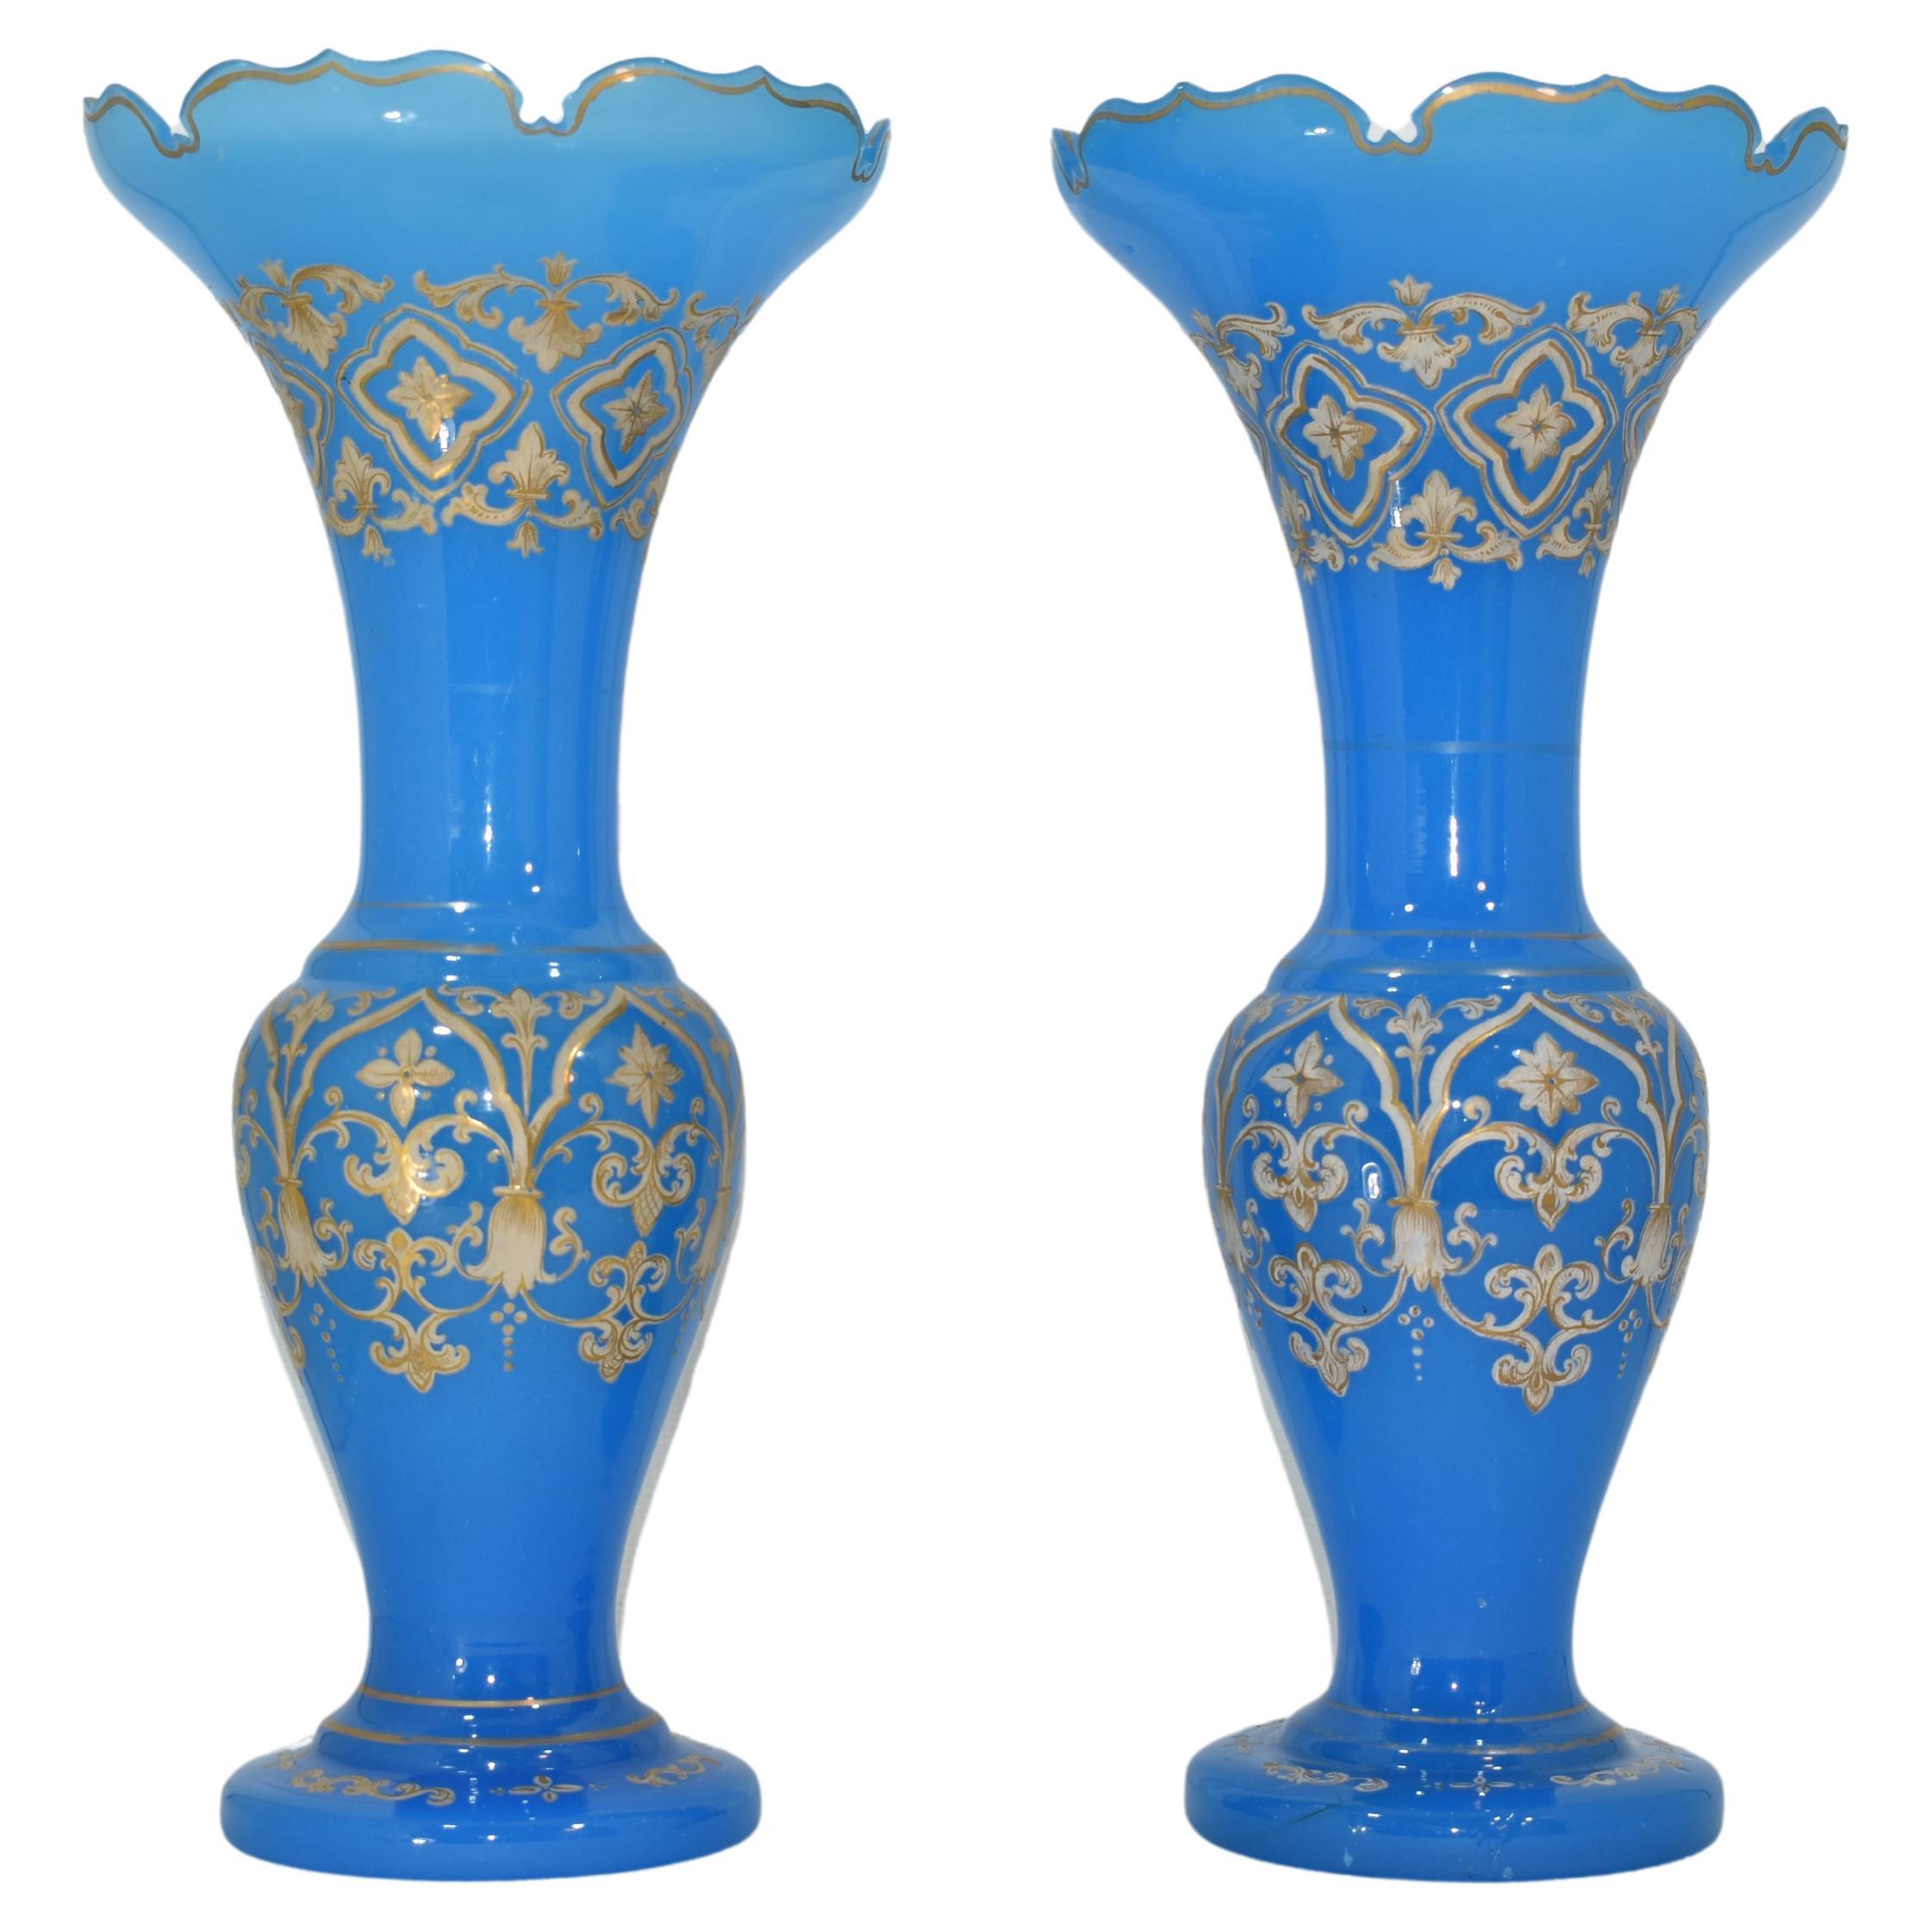 An exquisite large pair of vases in enamelled blue alabaster opaline glass
Bohemia, 19th century
Beautiful circular body decorated all through with gilded enamel and gilding highlights.